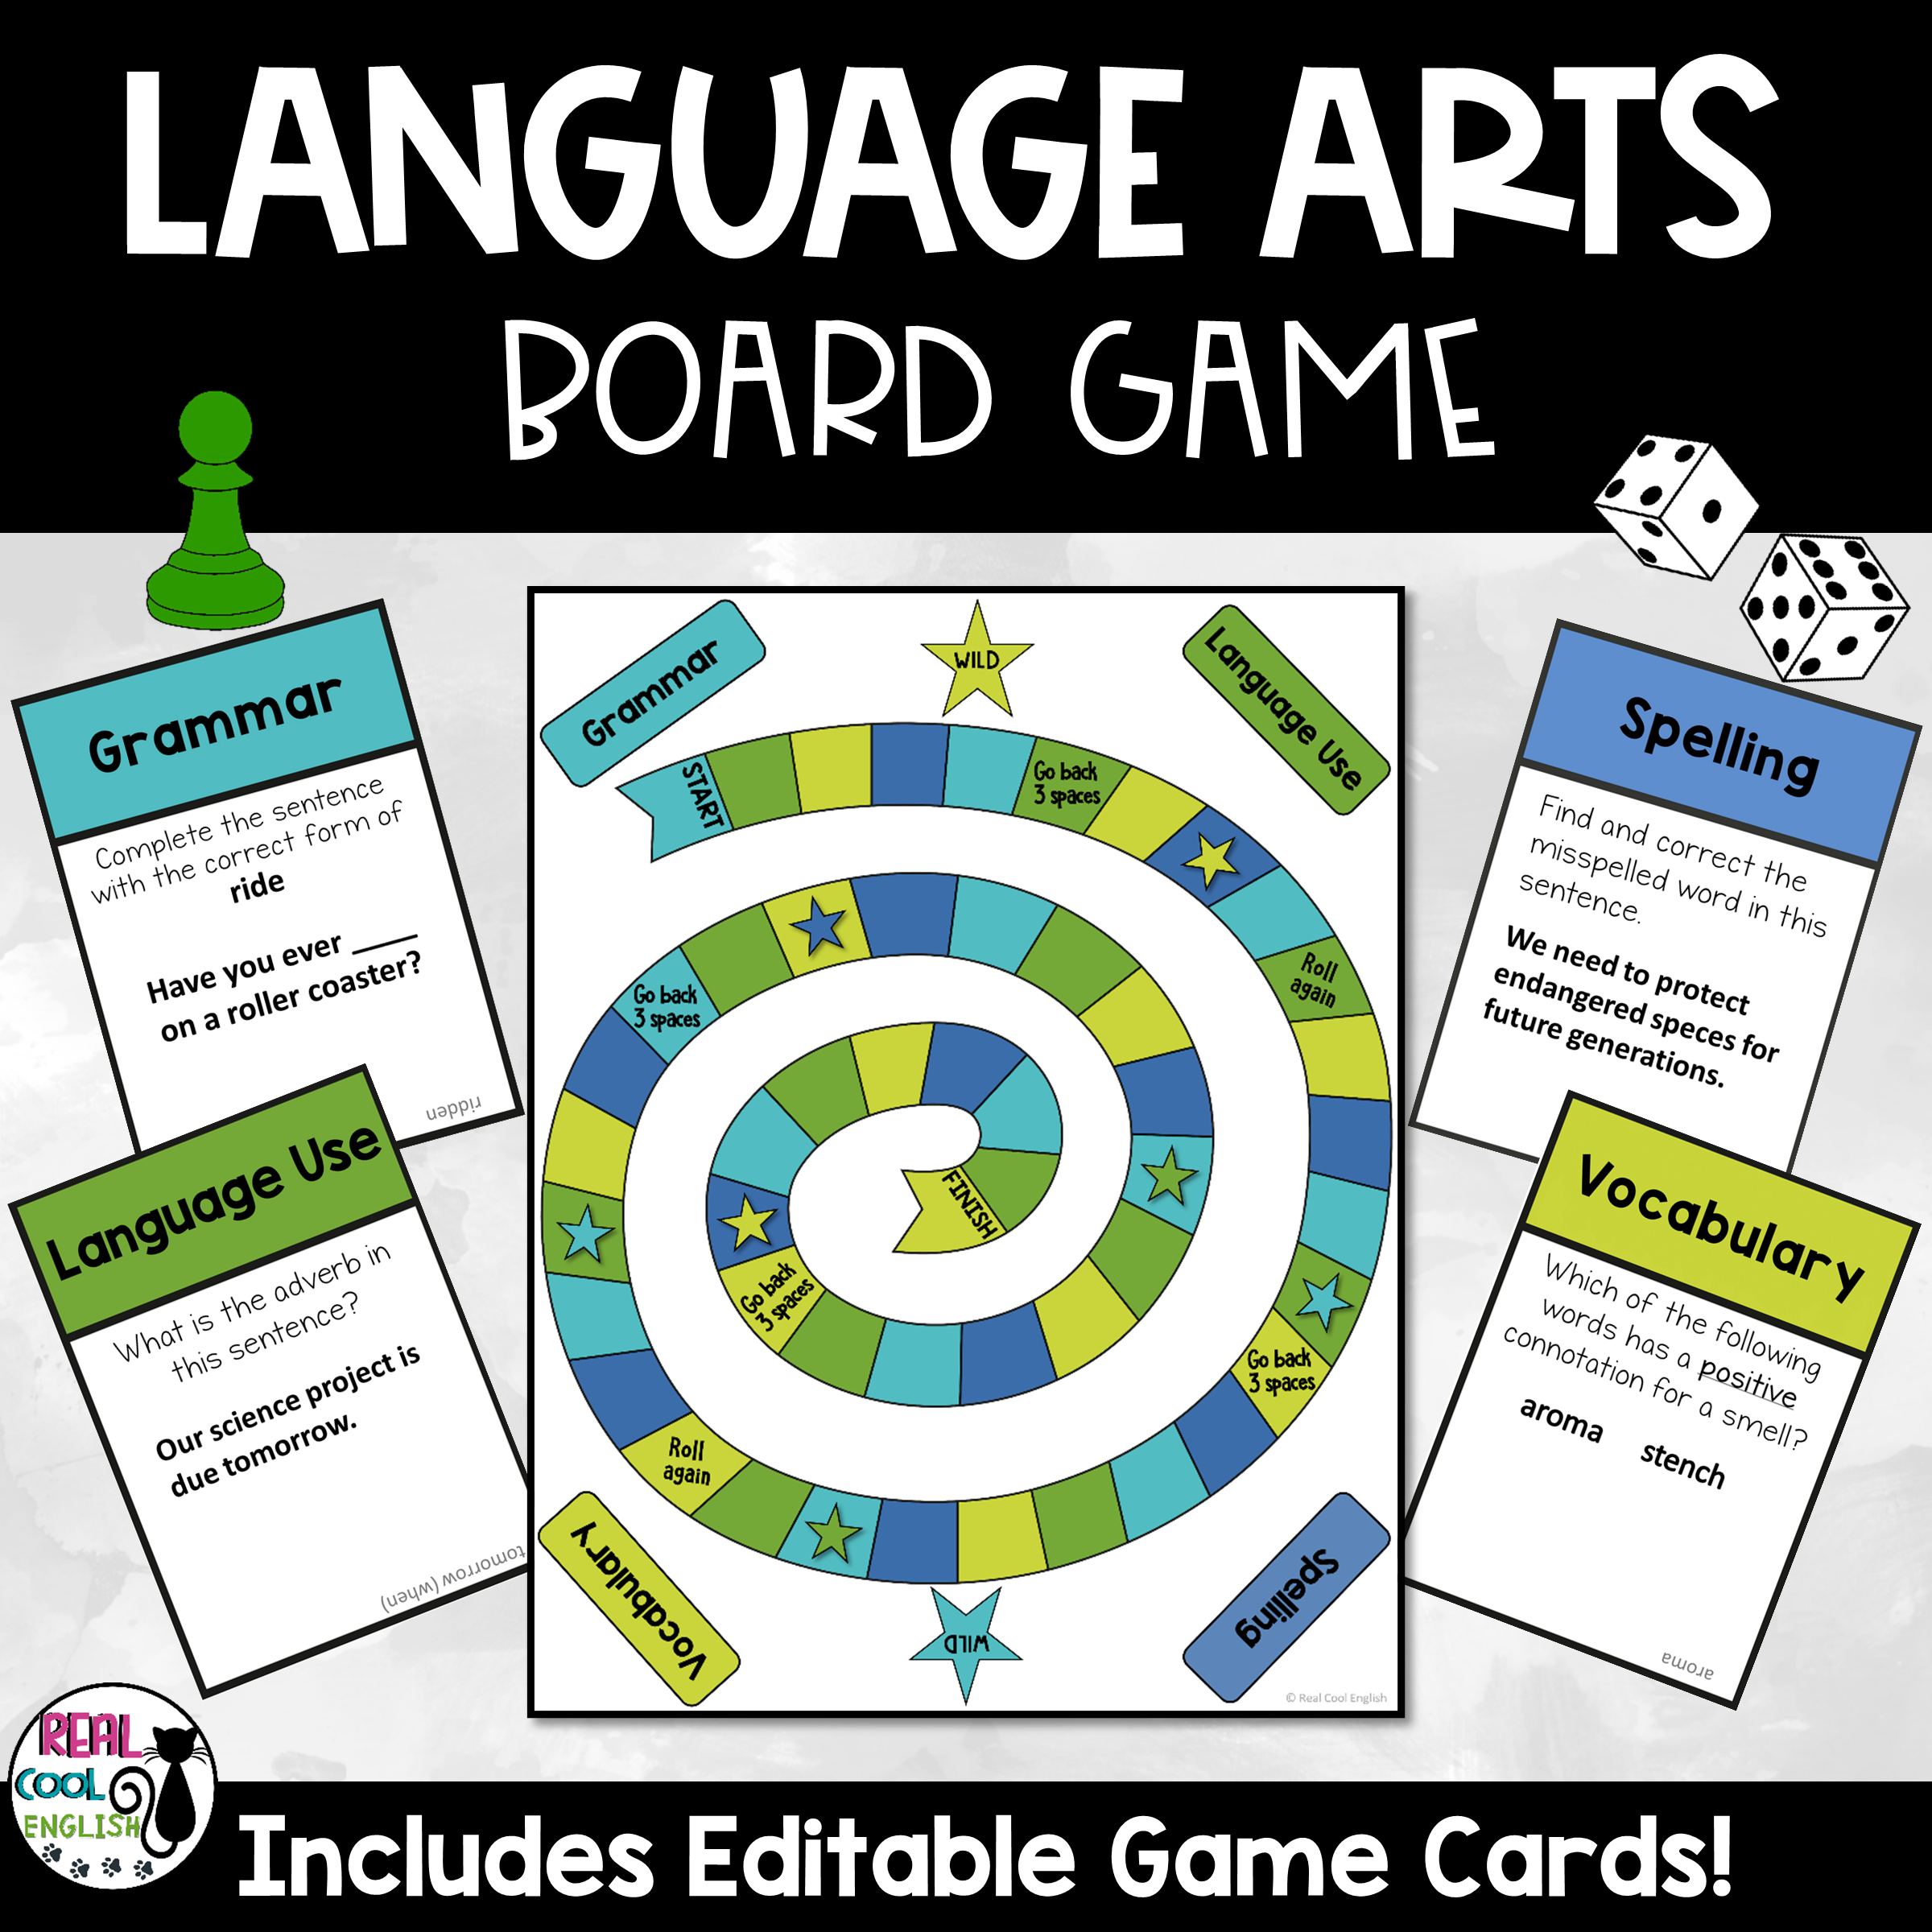 Language arts board game for spelling, grammar, vocabulary, and language use